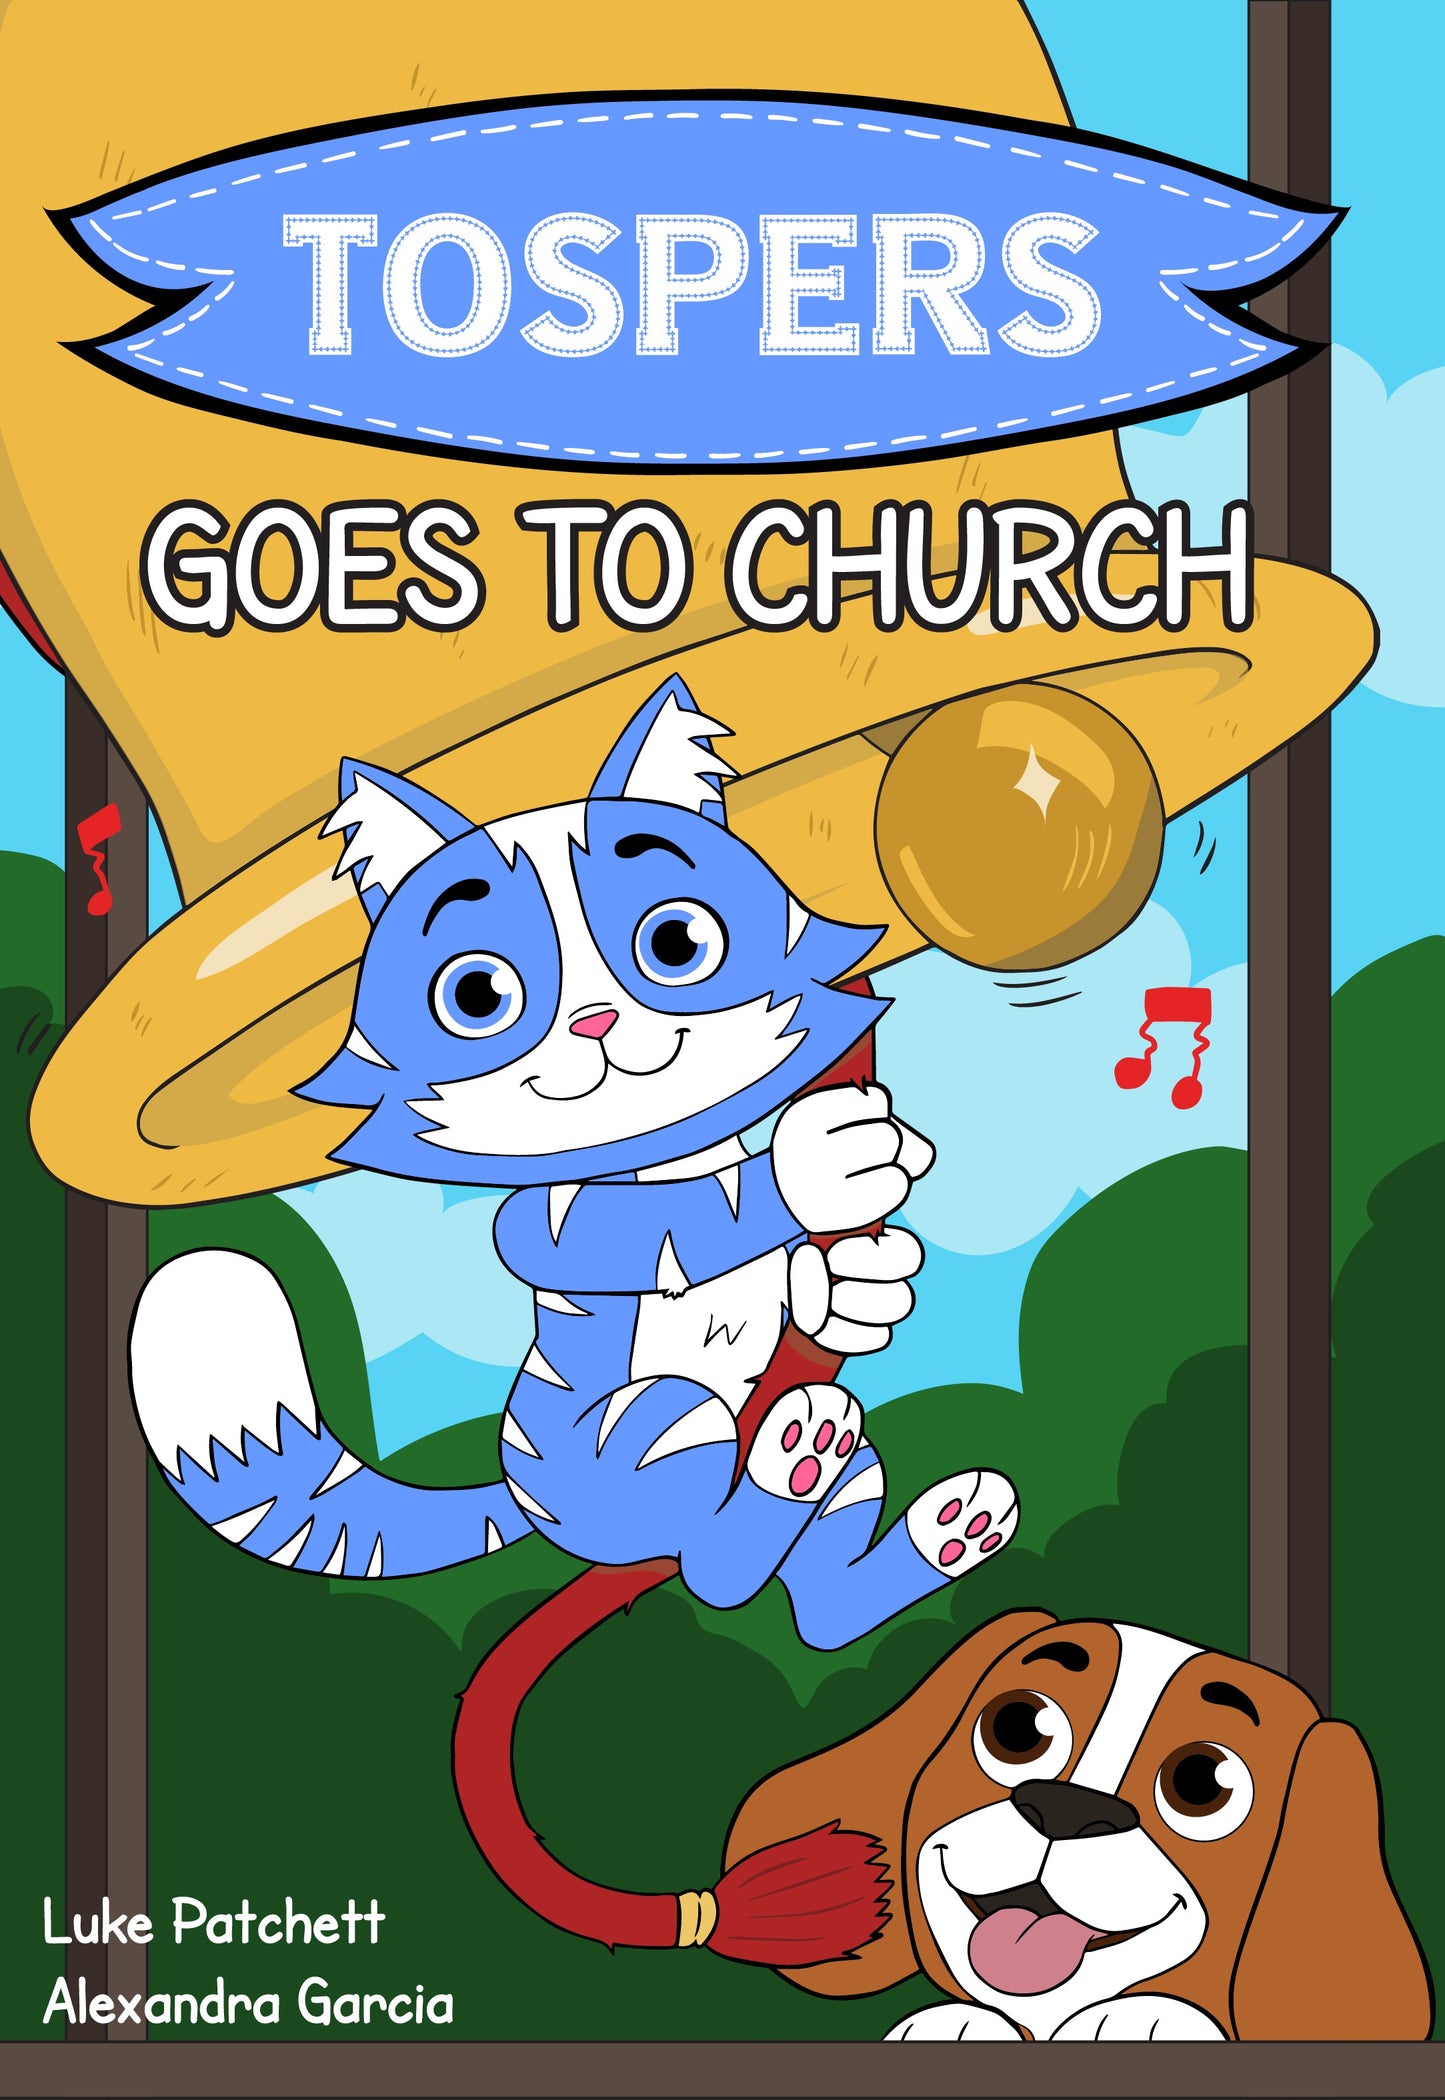 Tospers Goes to Church